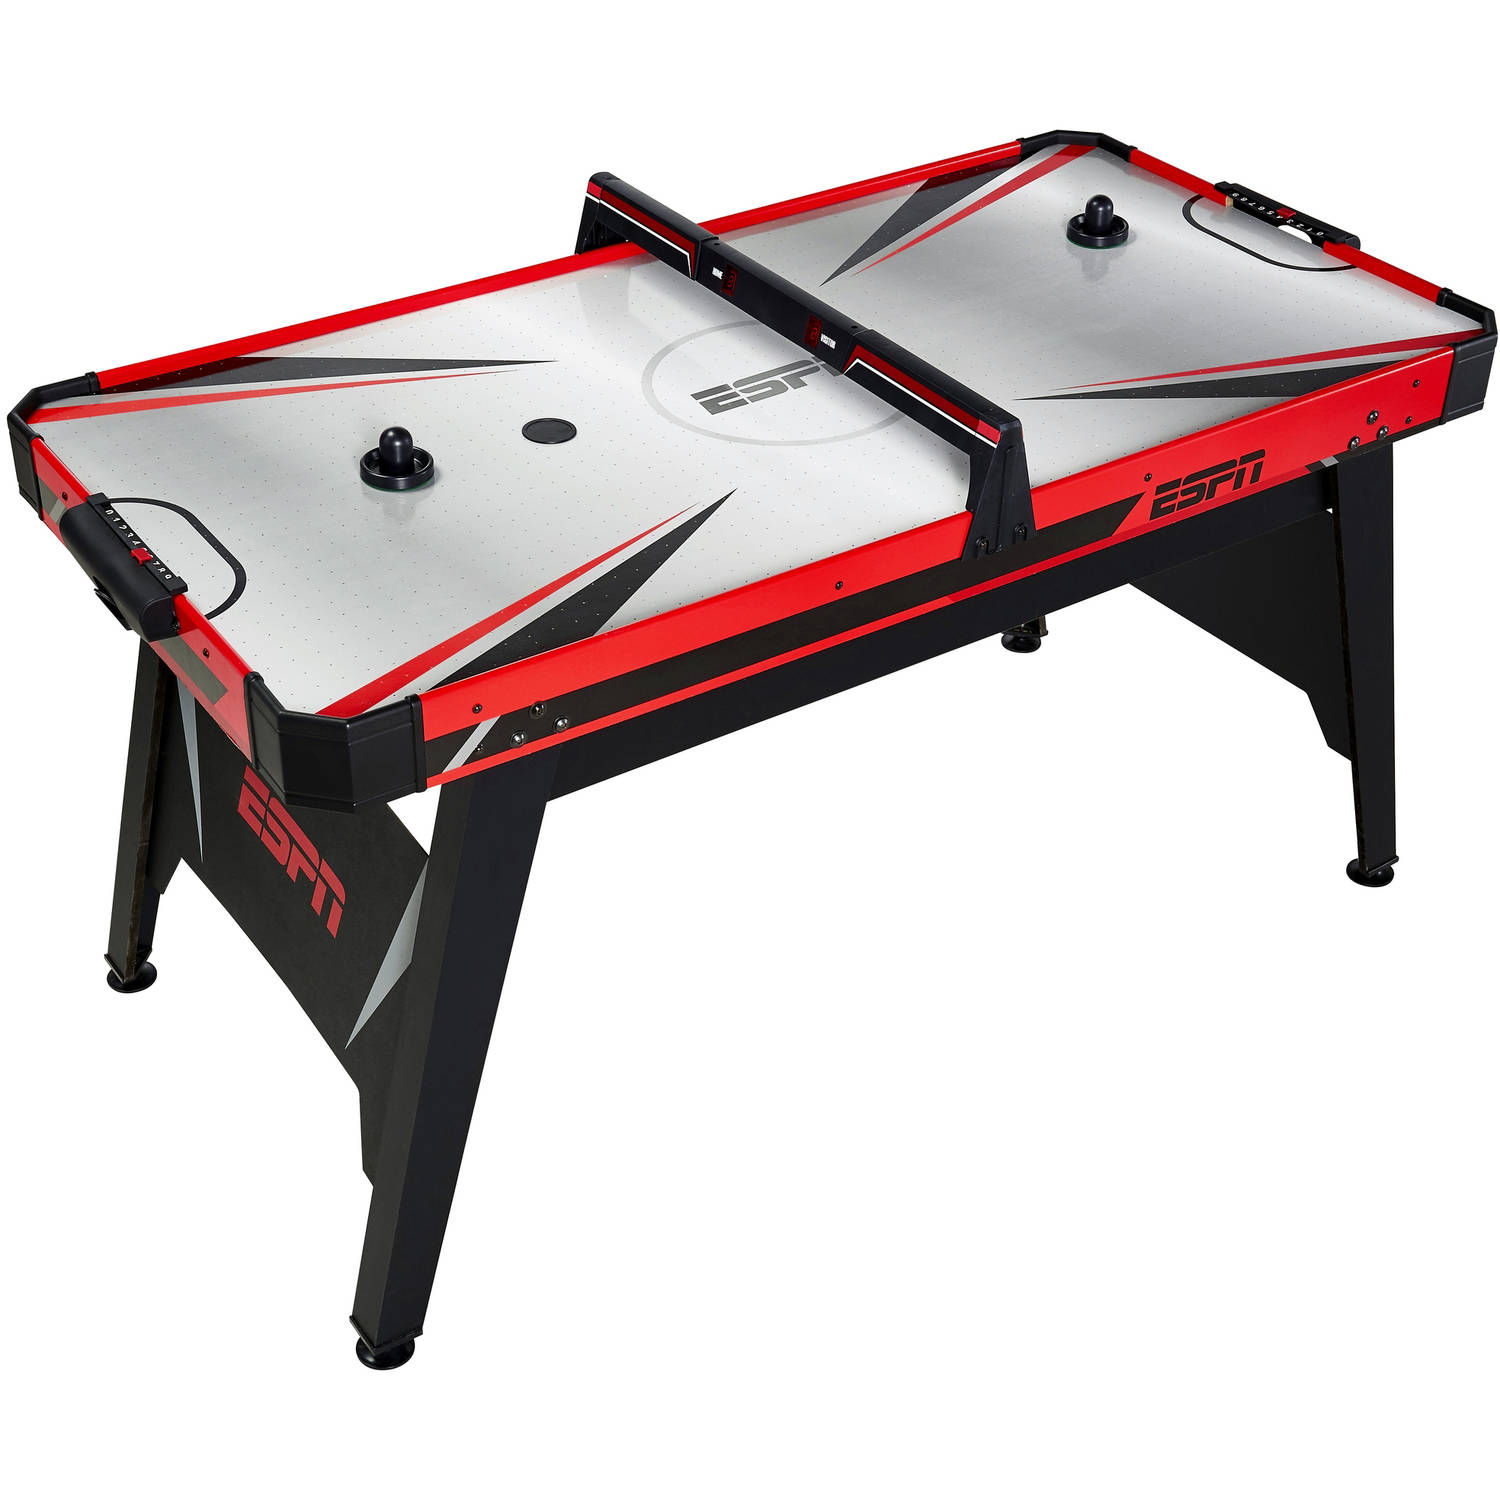 ESPN 60" Air Powered Hockey Table with Overhead Electronic Scorer, Accessories Included, Black/Red - image 7 of 8